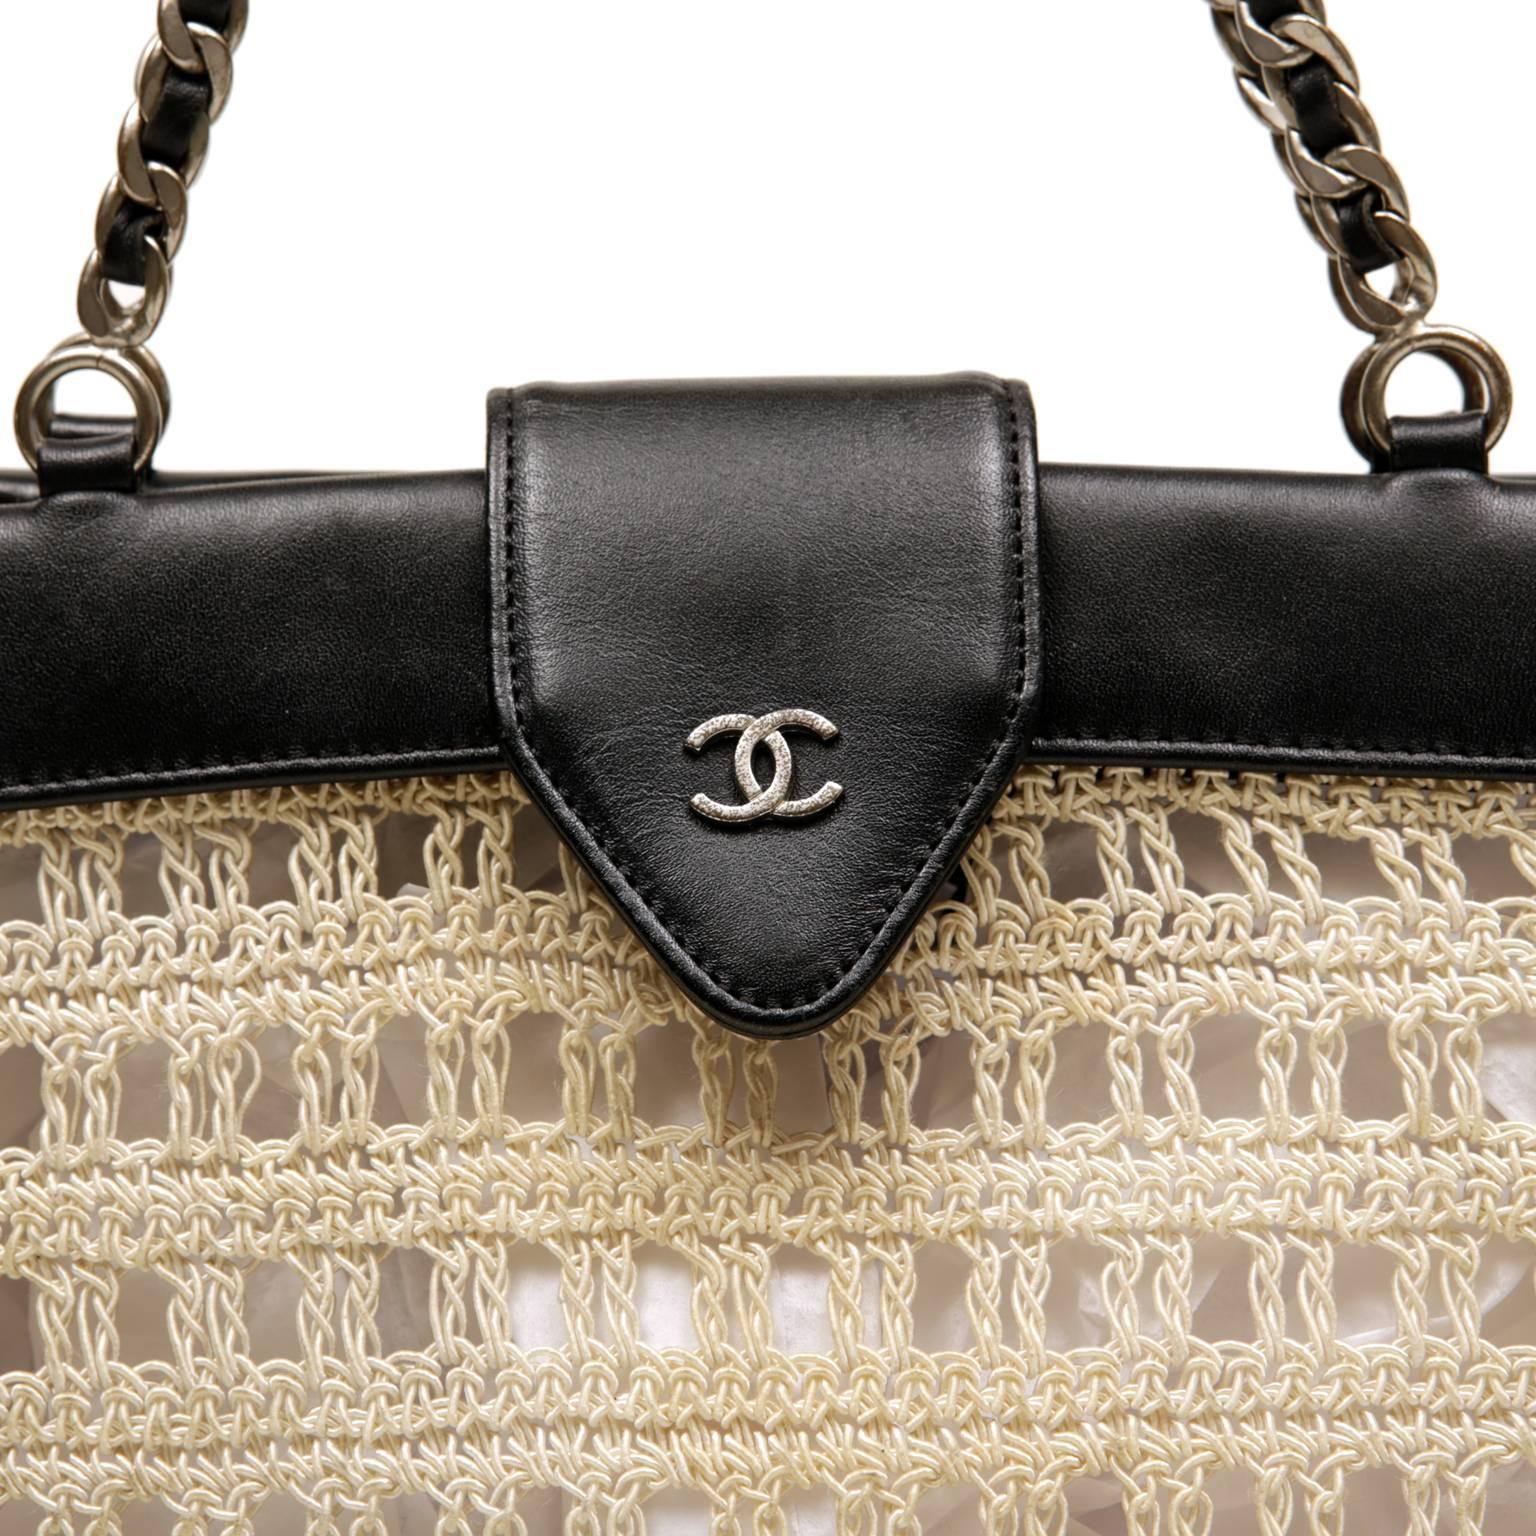 Chanel Beige Crocheted and Black Leather Tote Bag For Sale 1